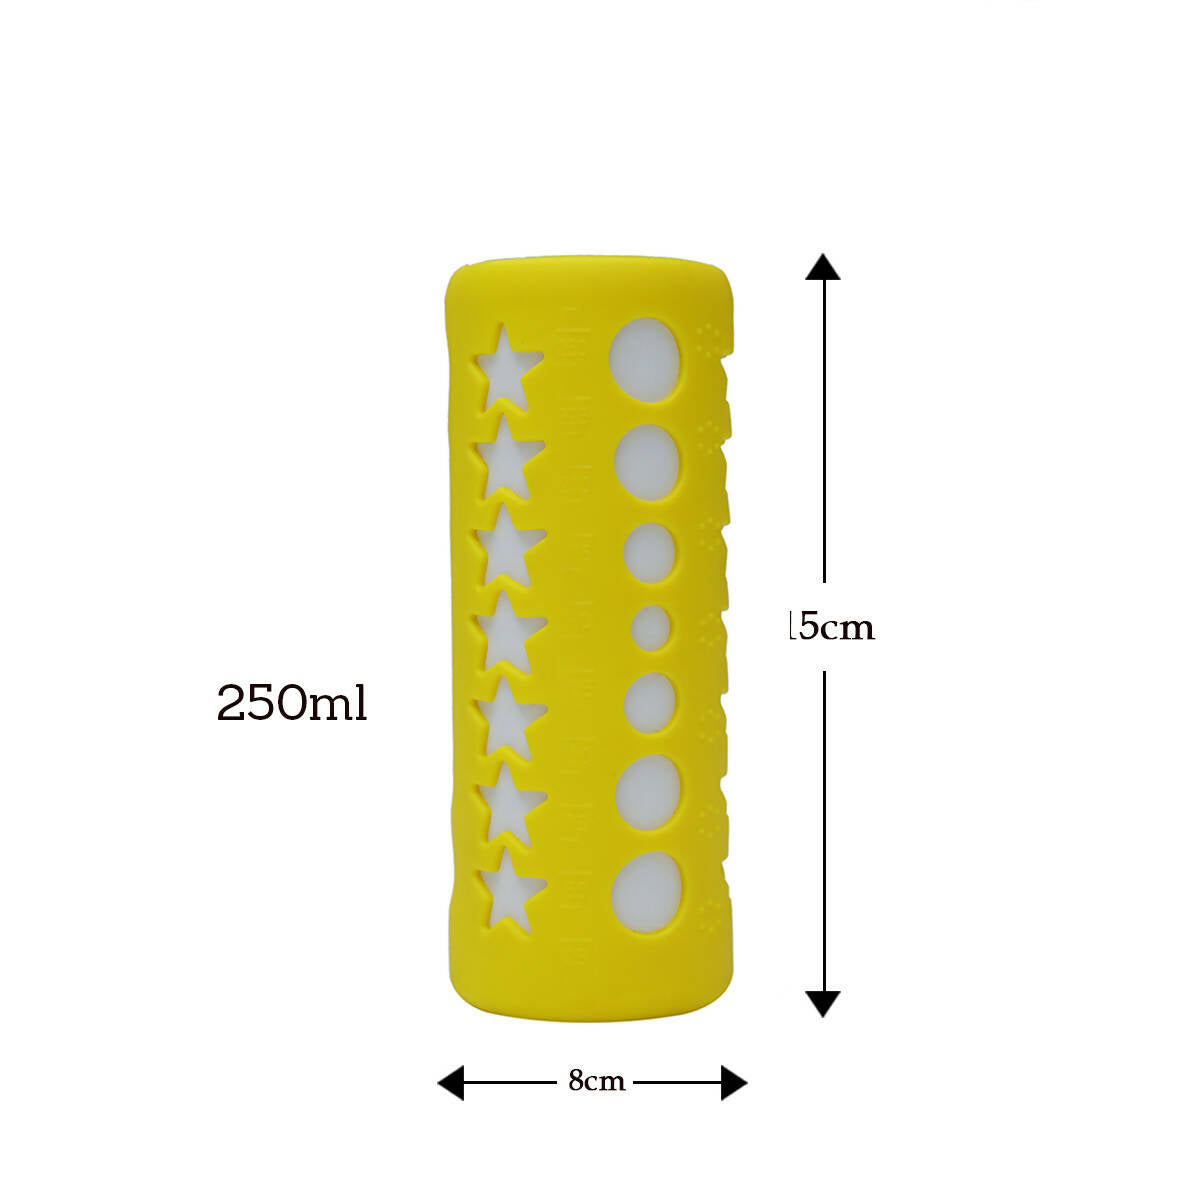 Safe-O-Kid Silicone Baby Feeding Bottle Cover Cum Sleeve for Insulated Protection 250mL- Yellow